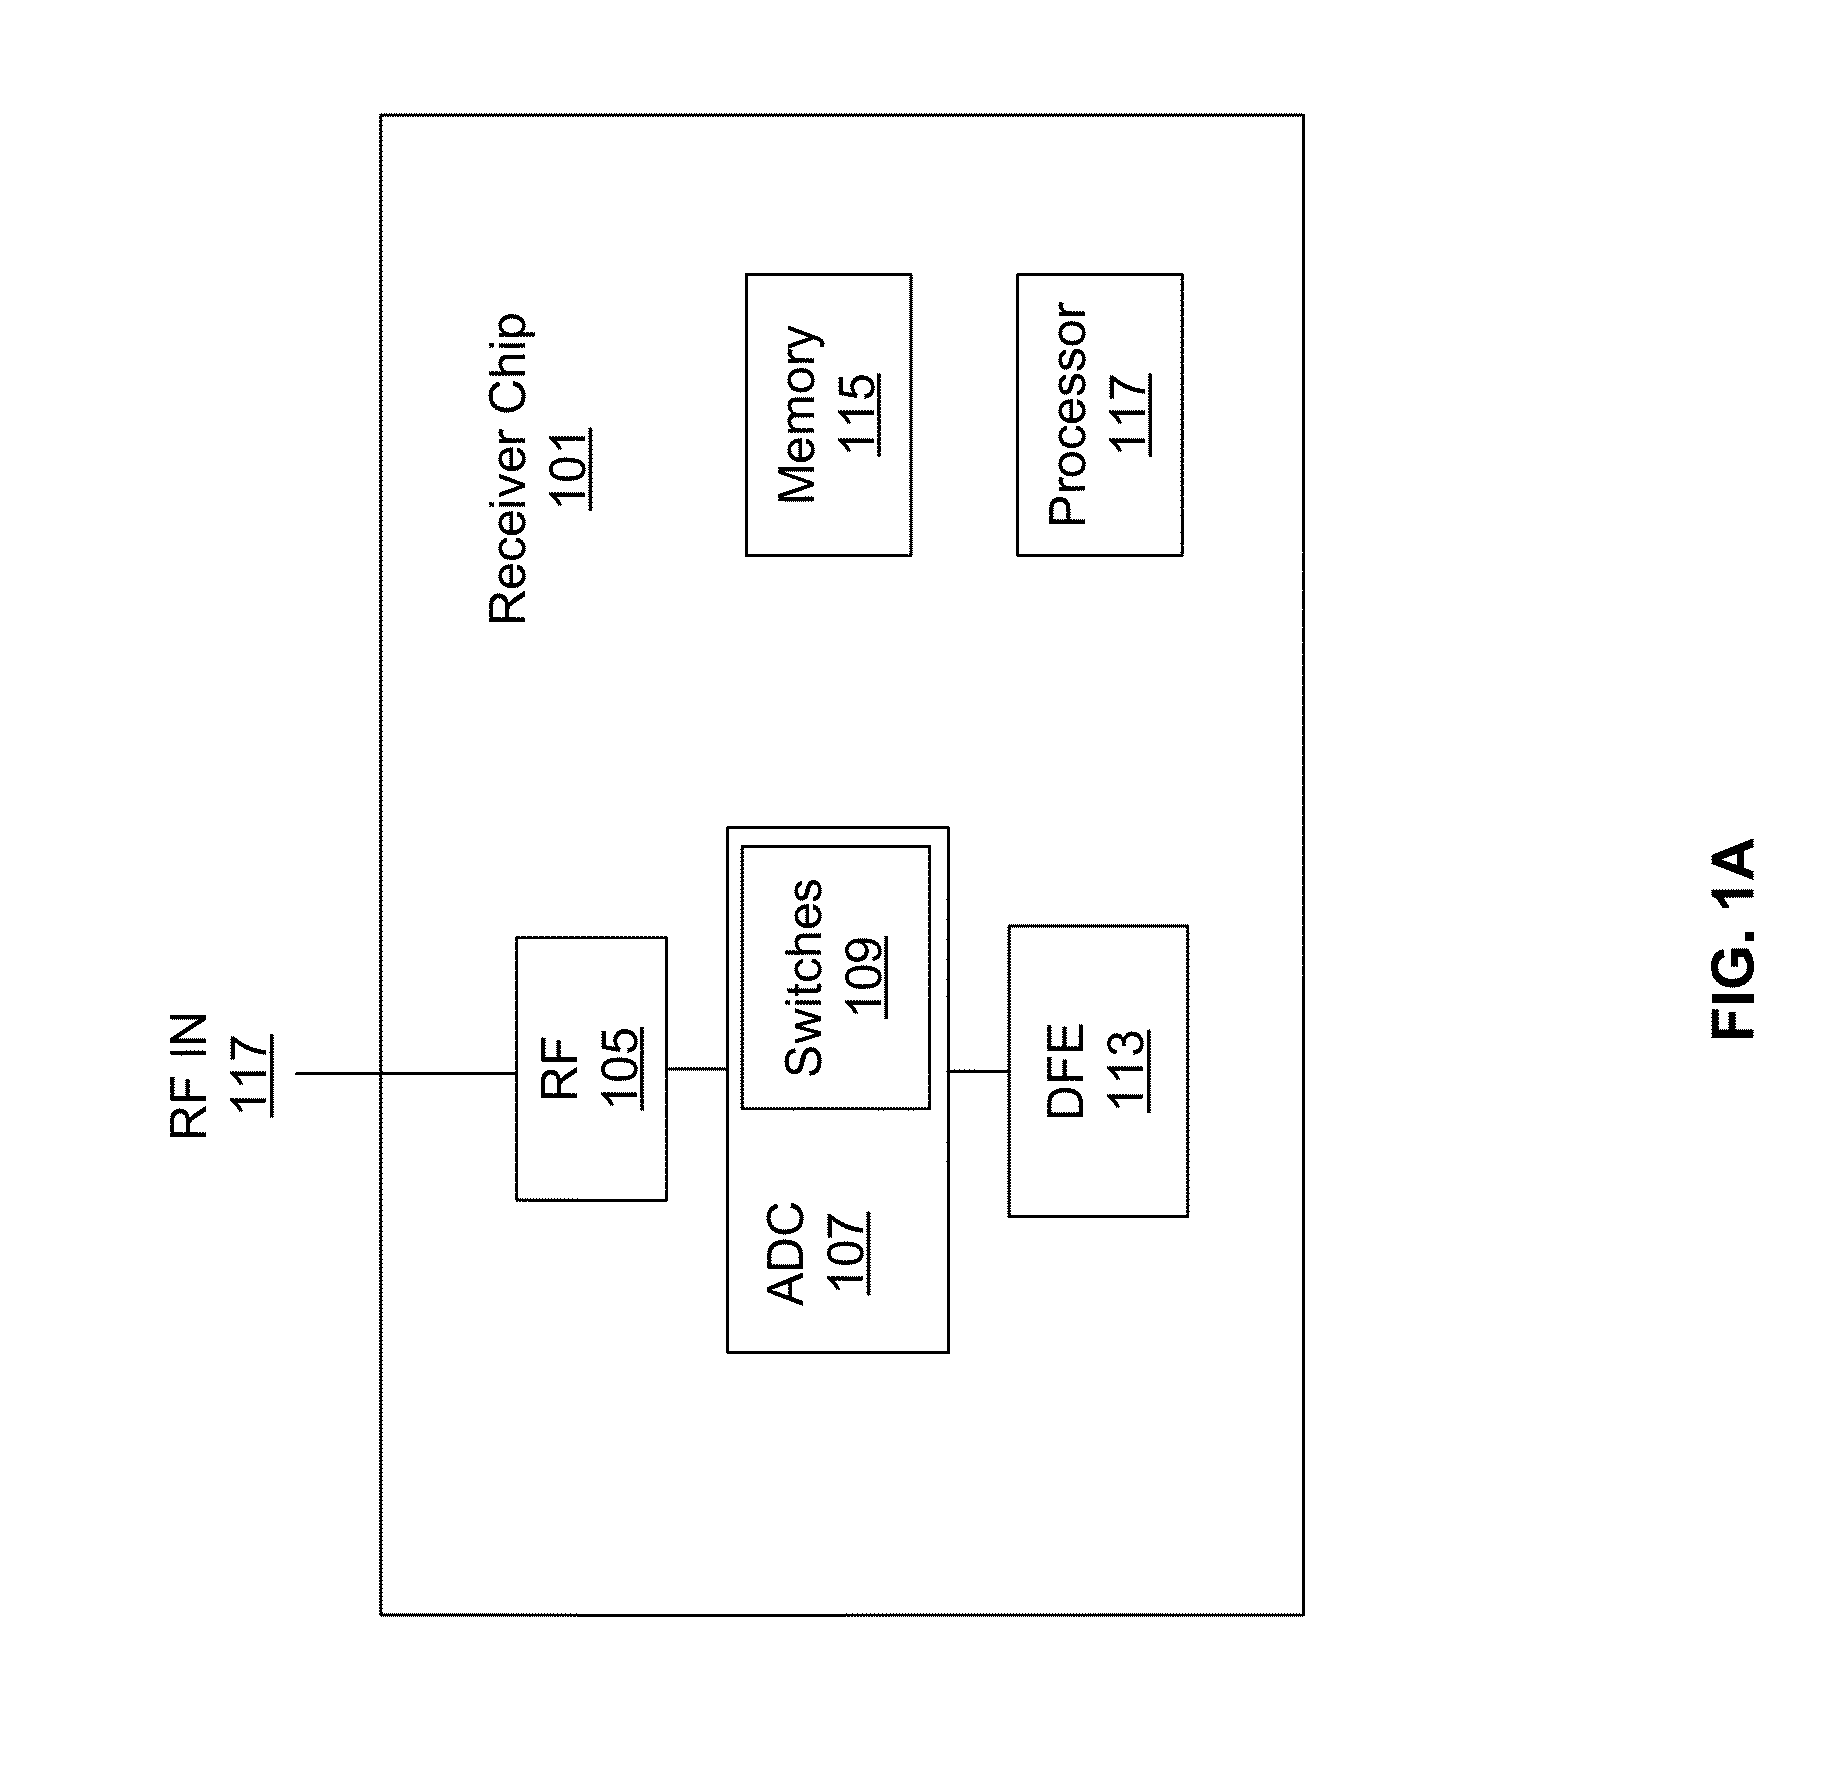 Method and system for reliable bootstrapping switches